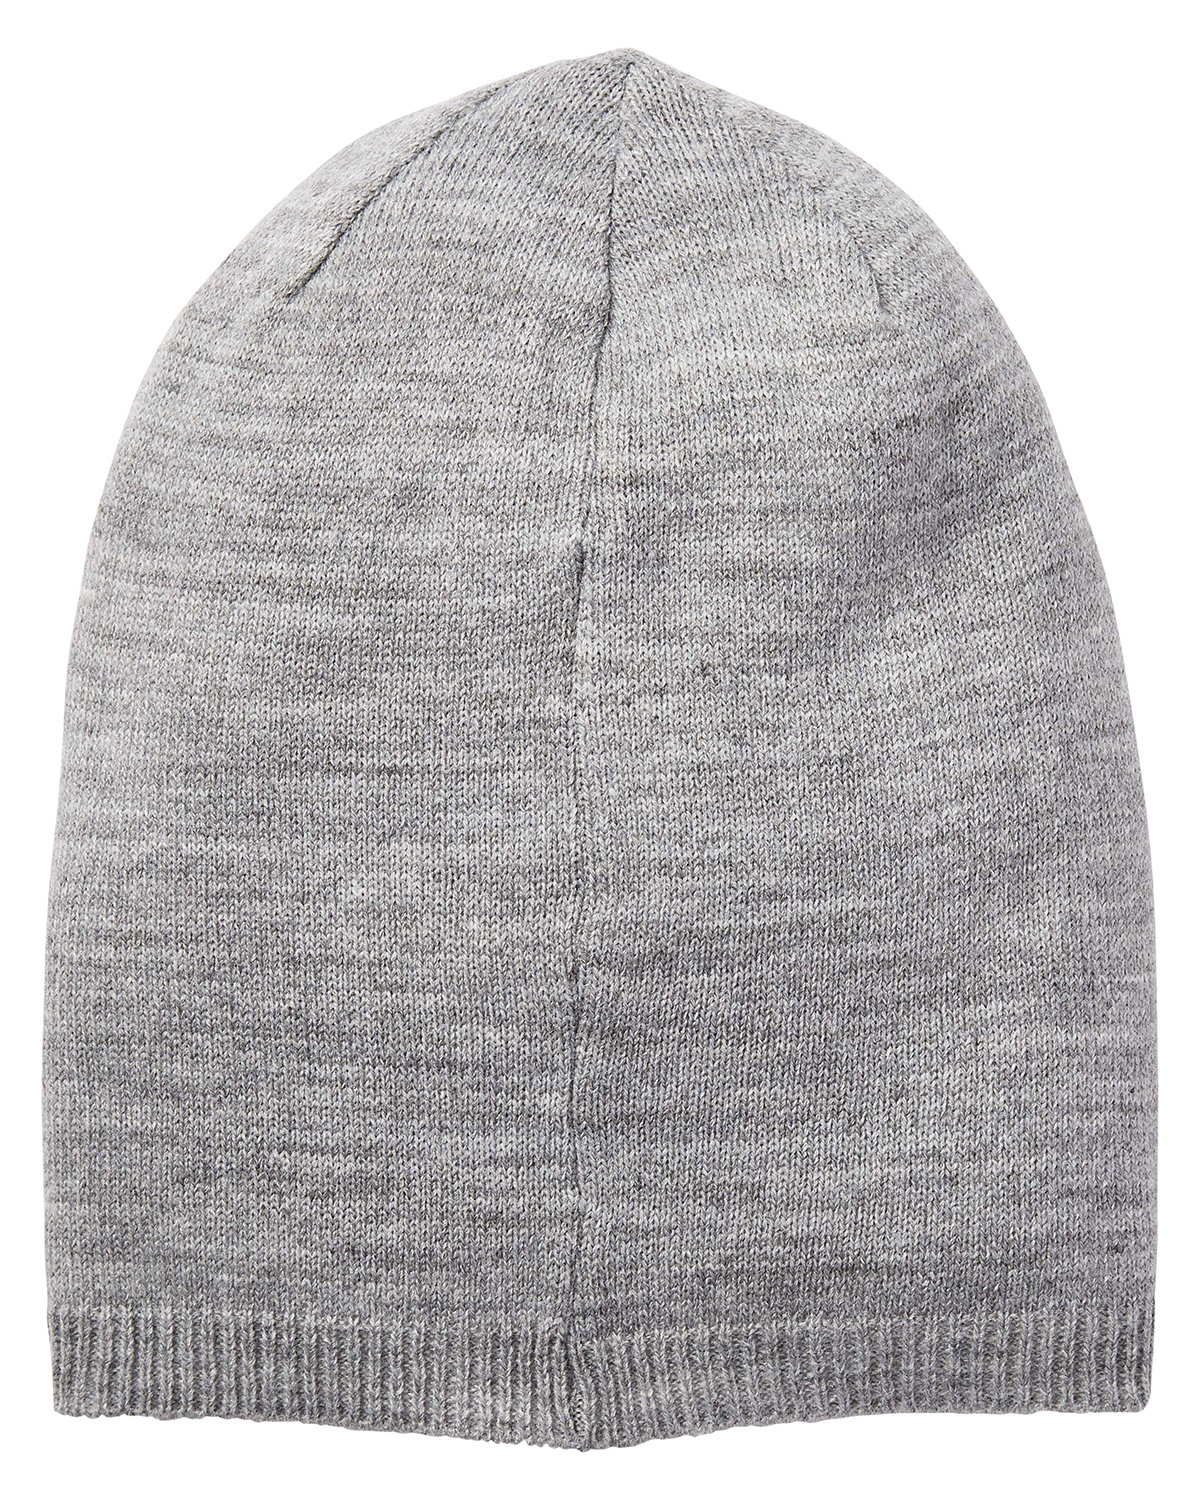 Marmot Tides Slouch Beanie | US Generic Non-Priced